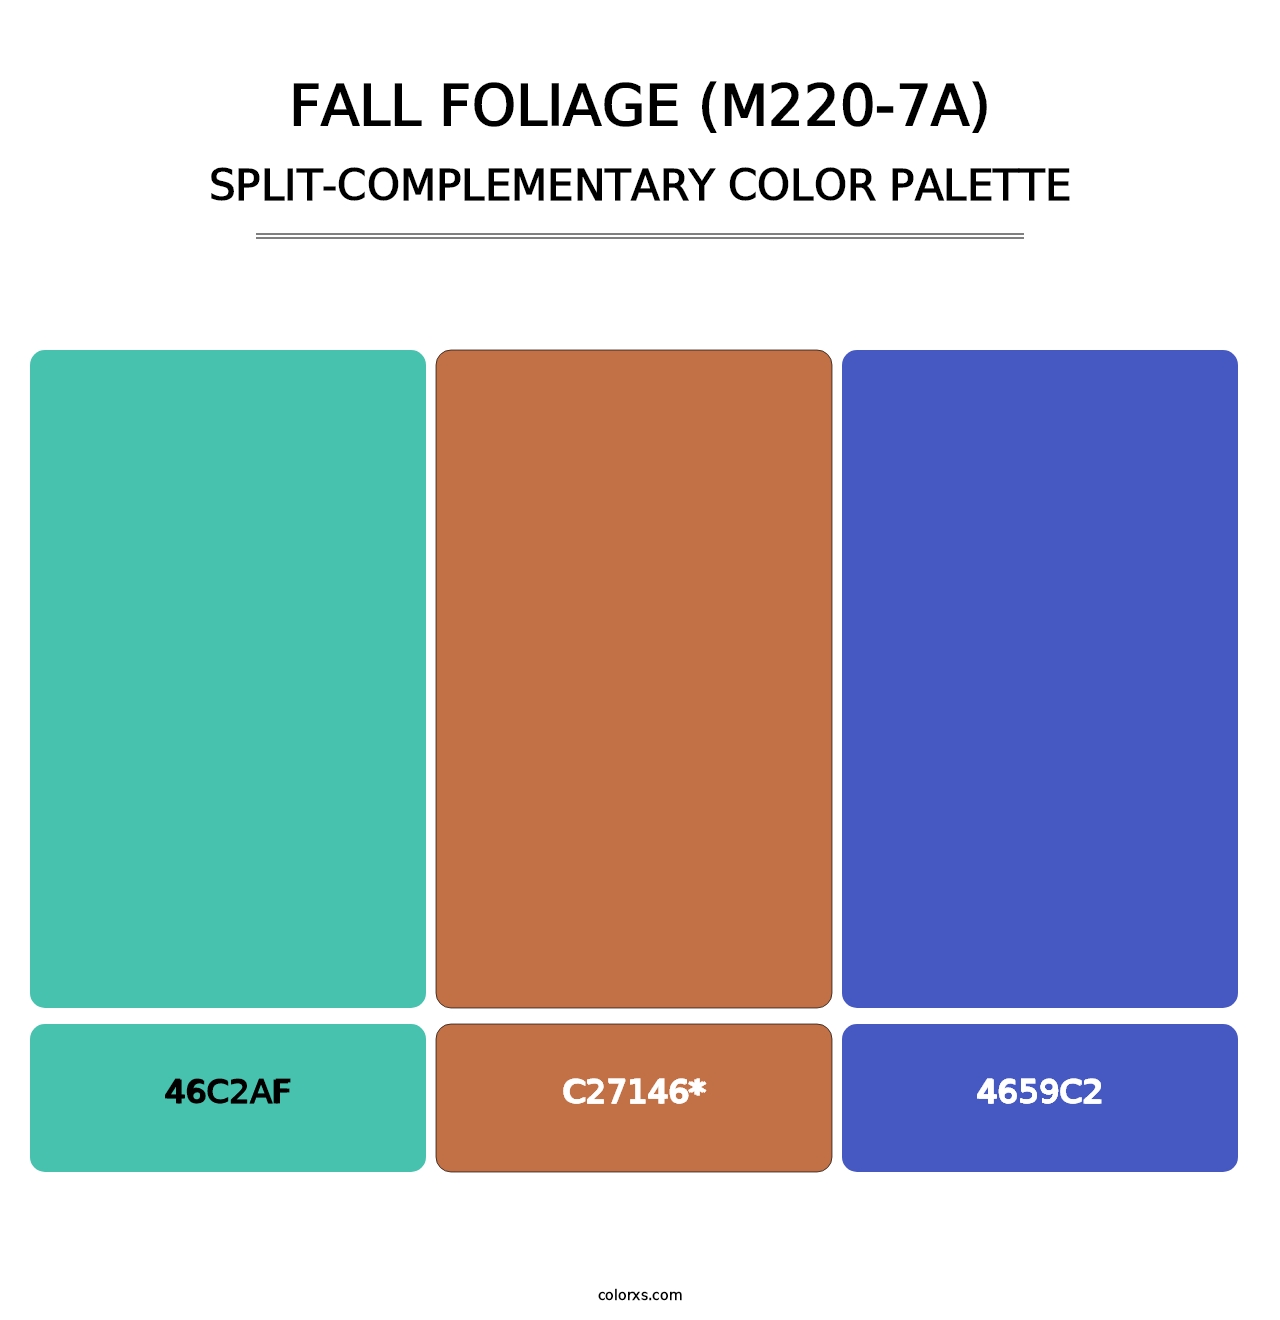 Fall Foliage (M220-7A) - Split-Complementary Color Palette